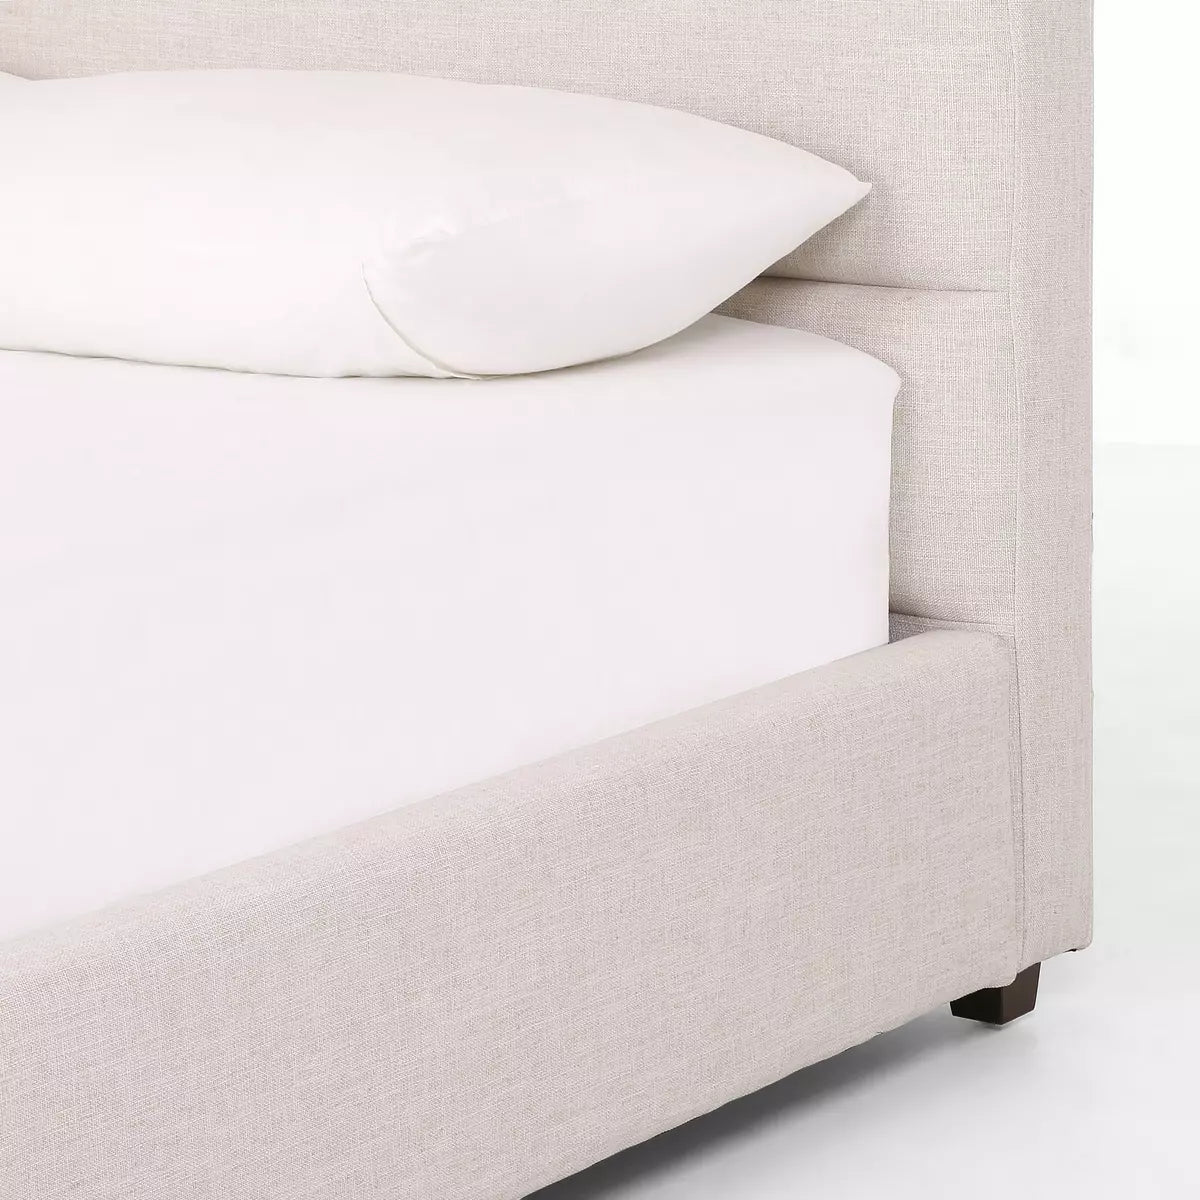 Ducor Bed